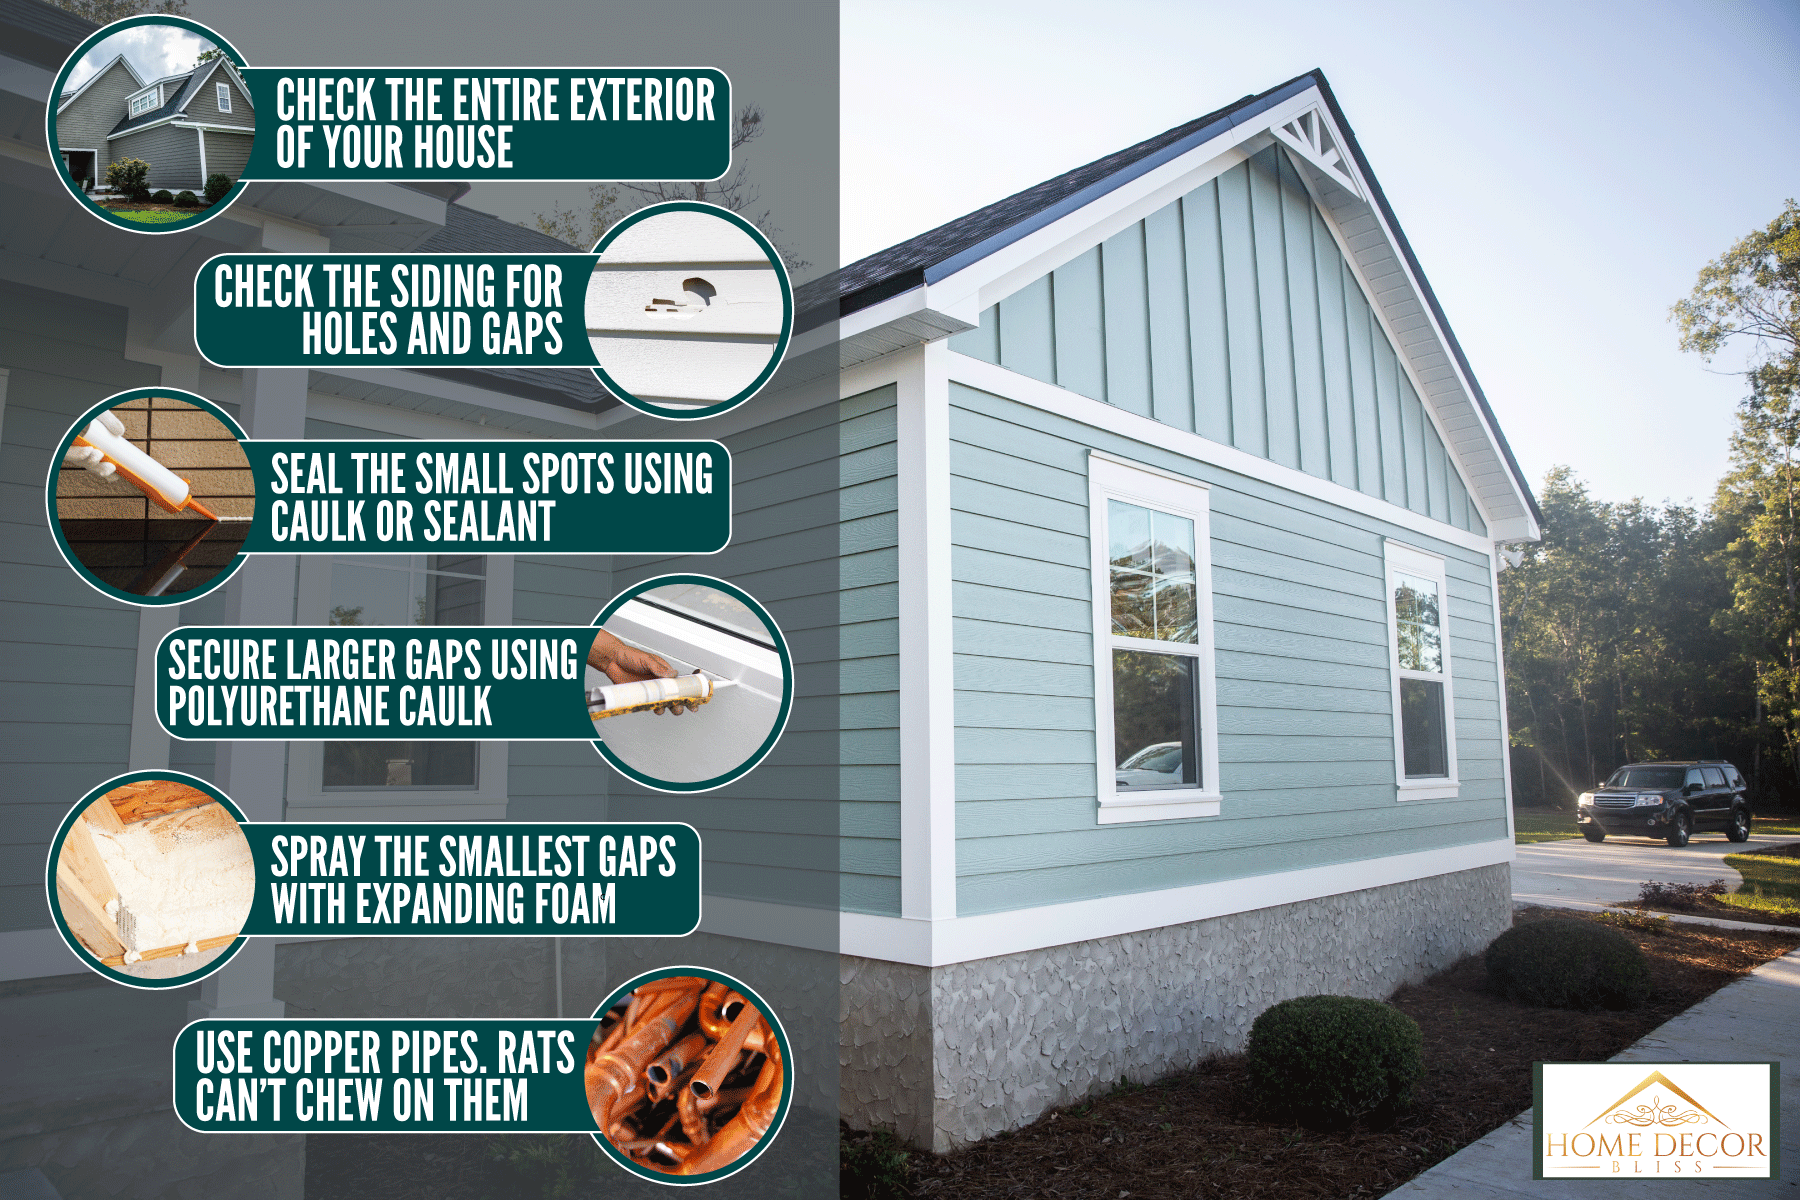 A house wooden siding painted in a turquoise color with white painted trims and black asphalt shingle roofing, How To Stop Mice From Getting Under Siding